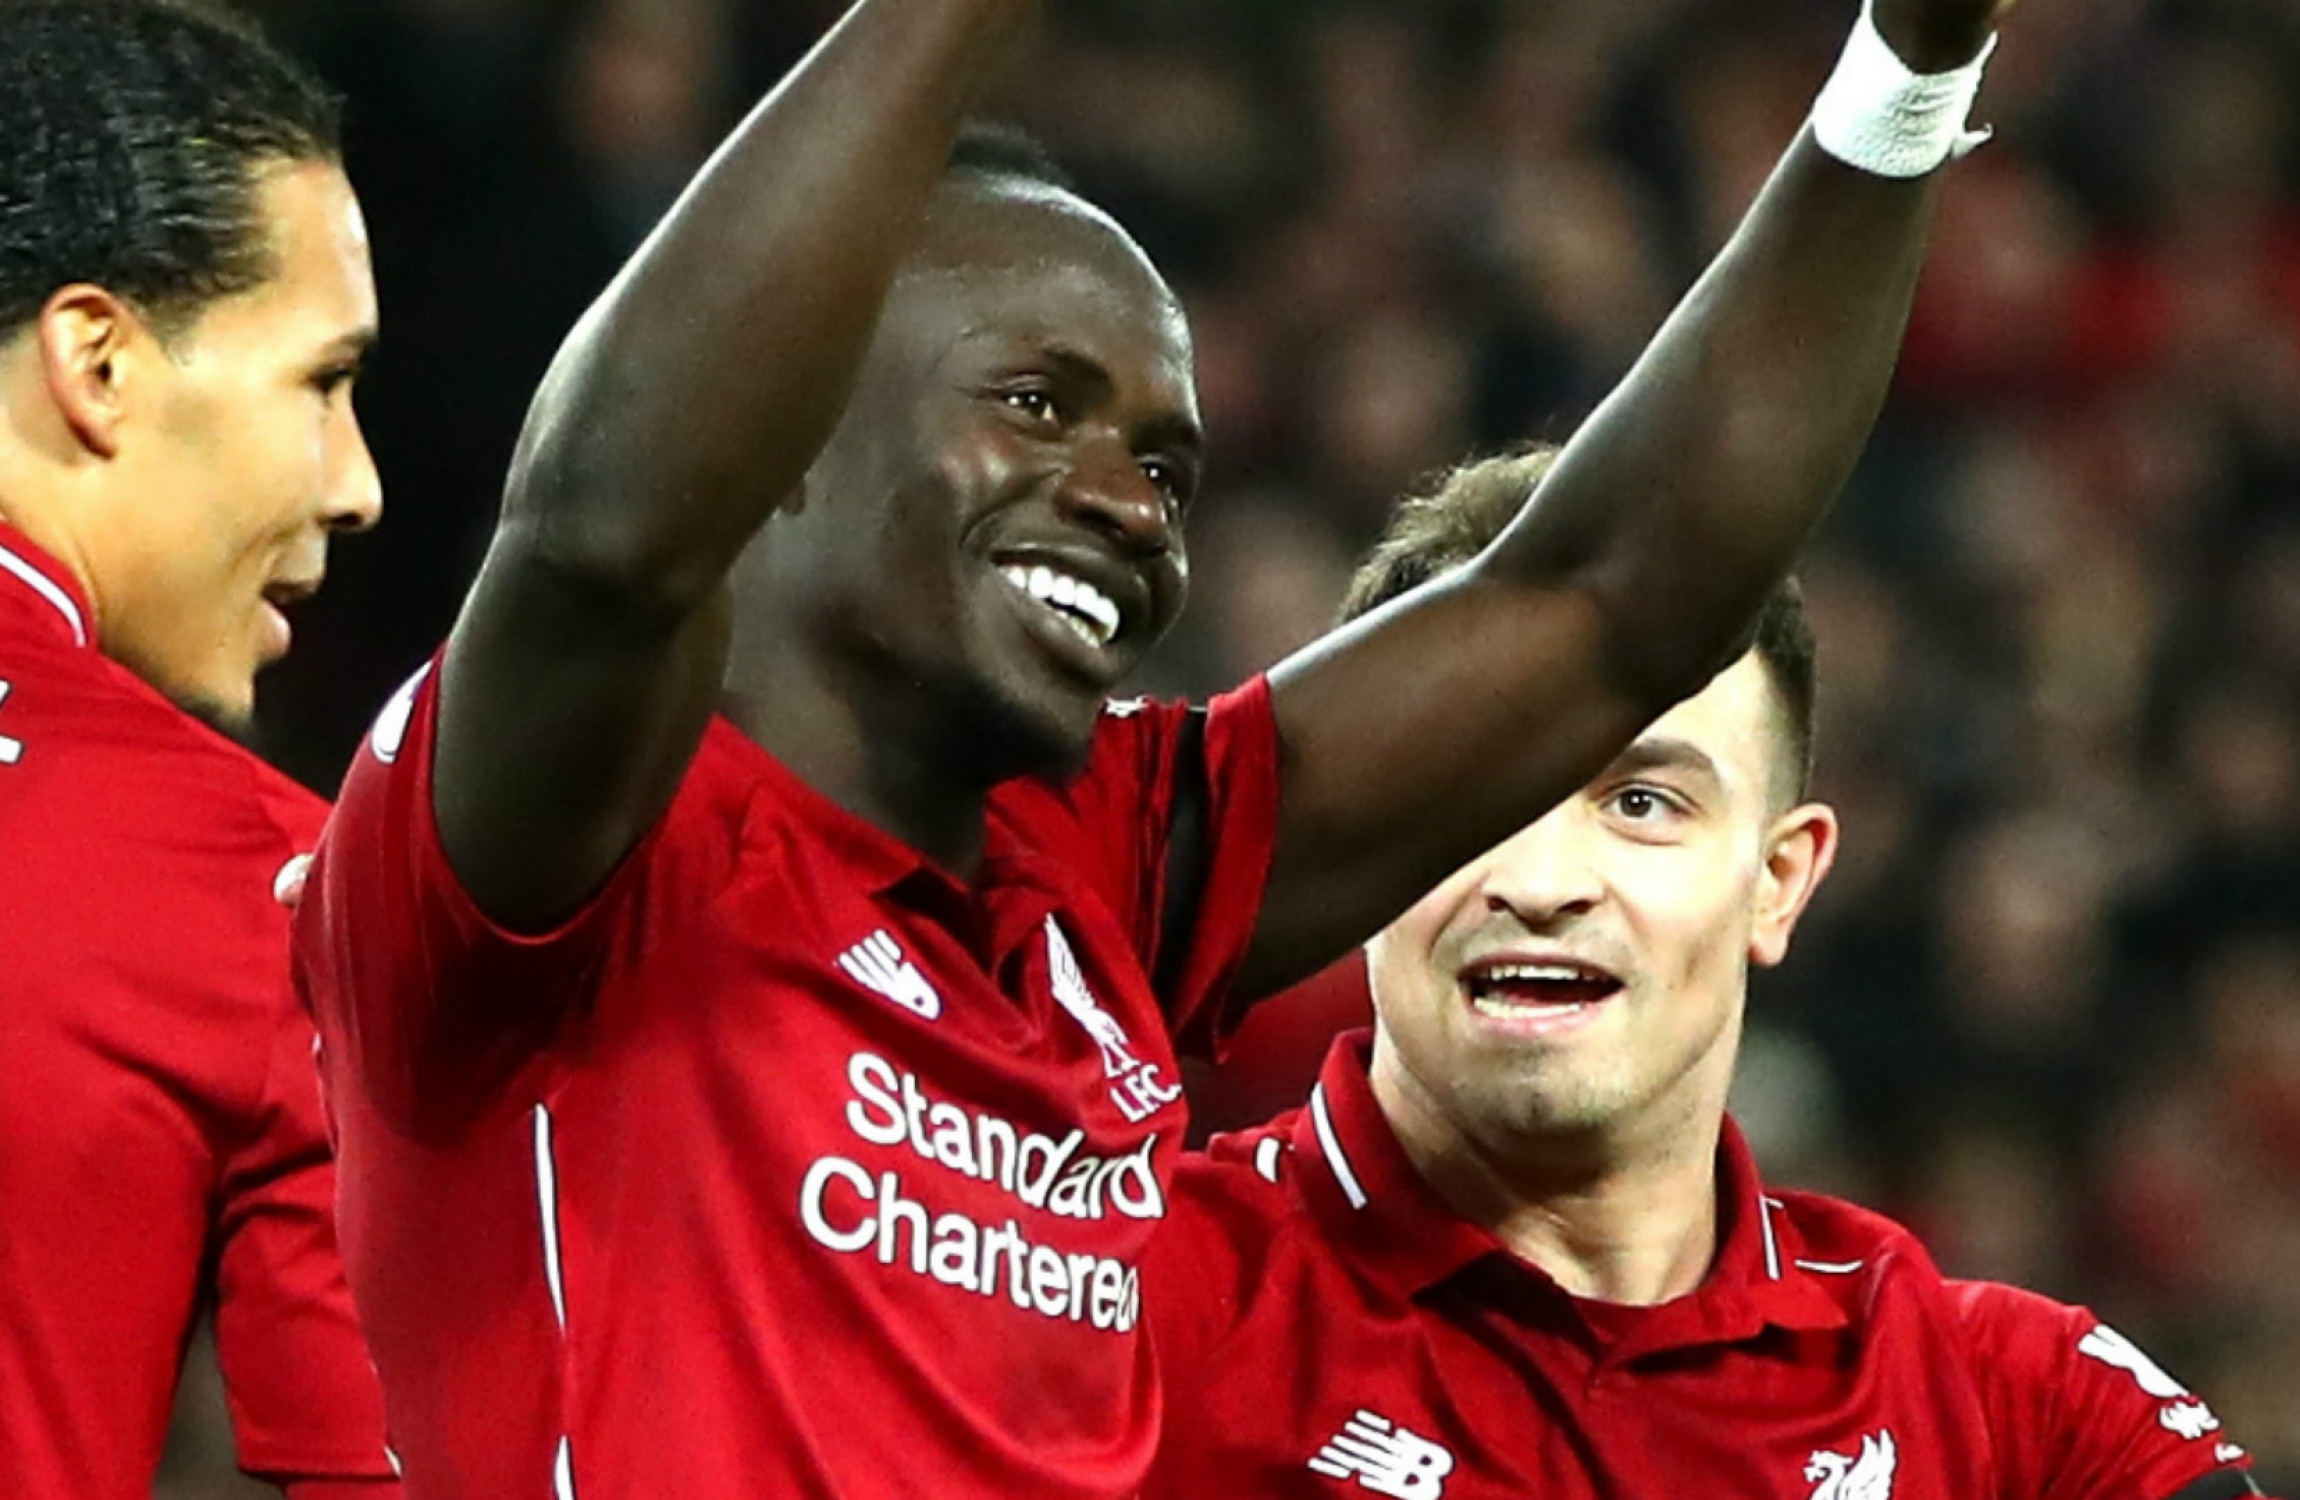 Boost for Liverpool as Mane escapes punishment and is free to face City